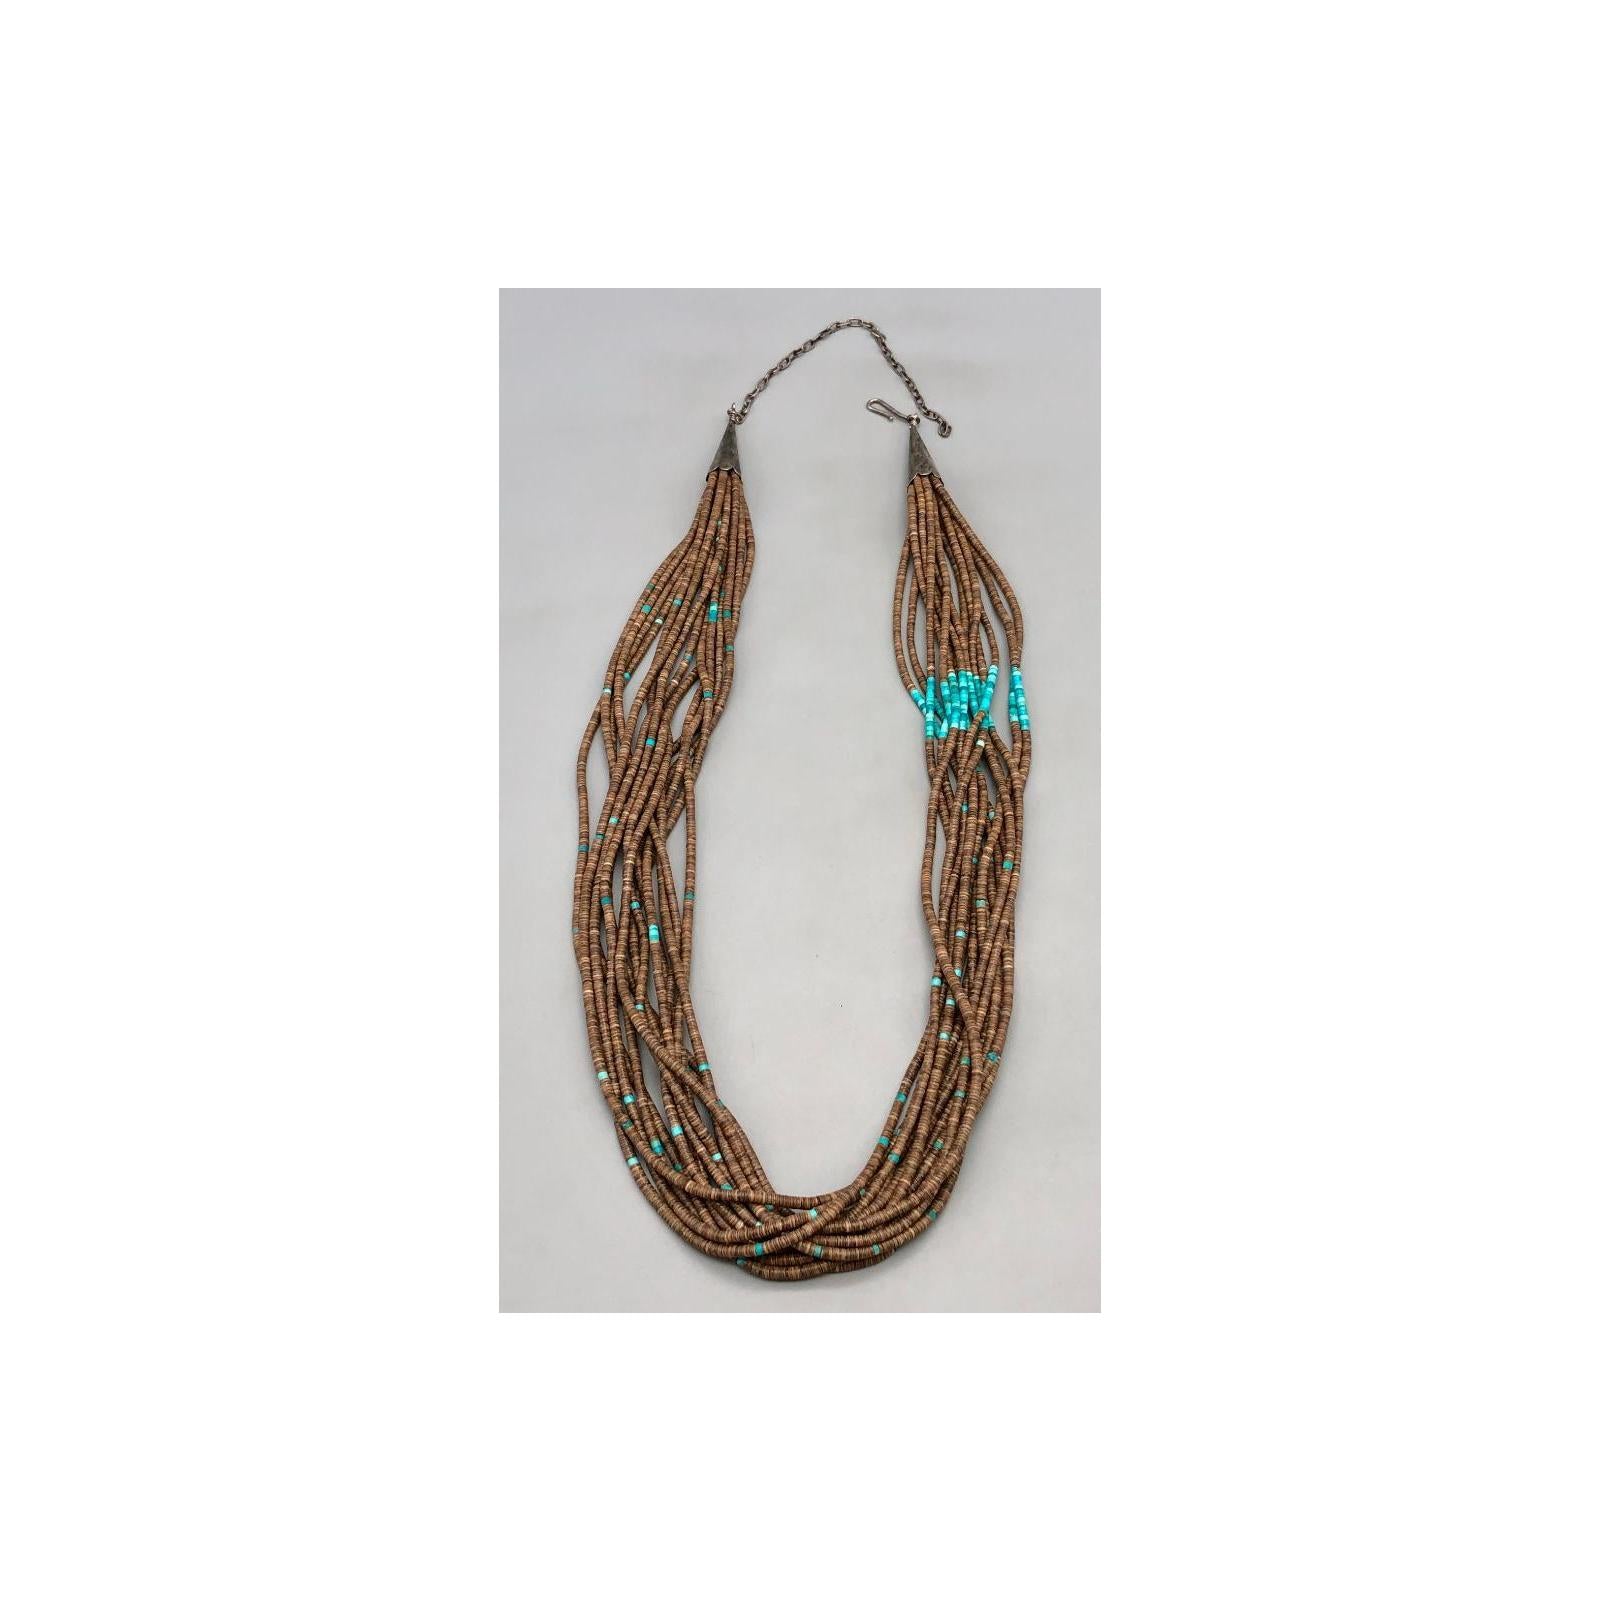 15-strand heishi and turquoise vintage necklace.